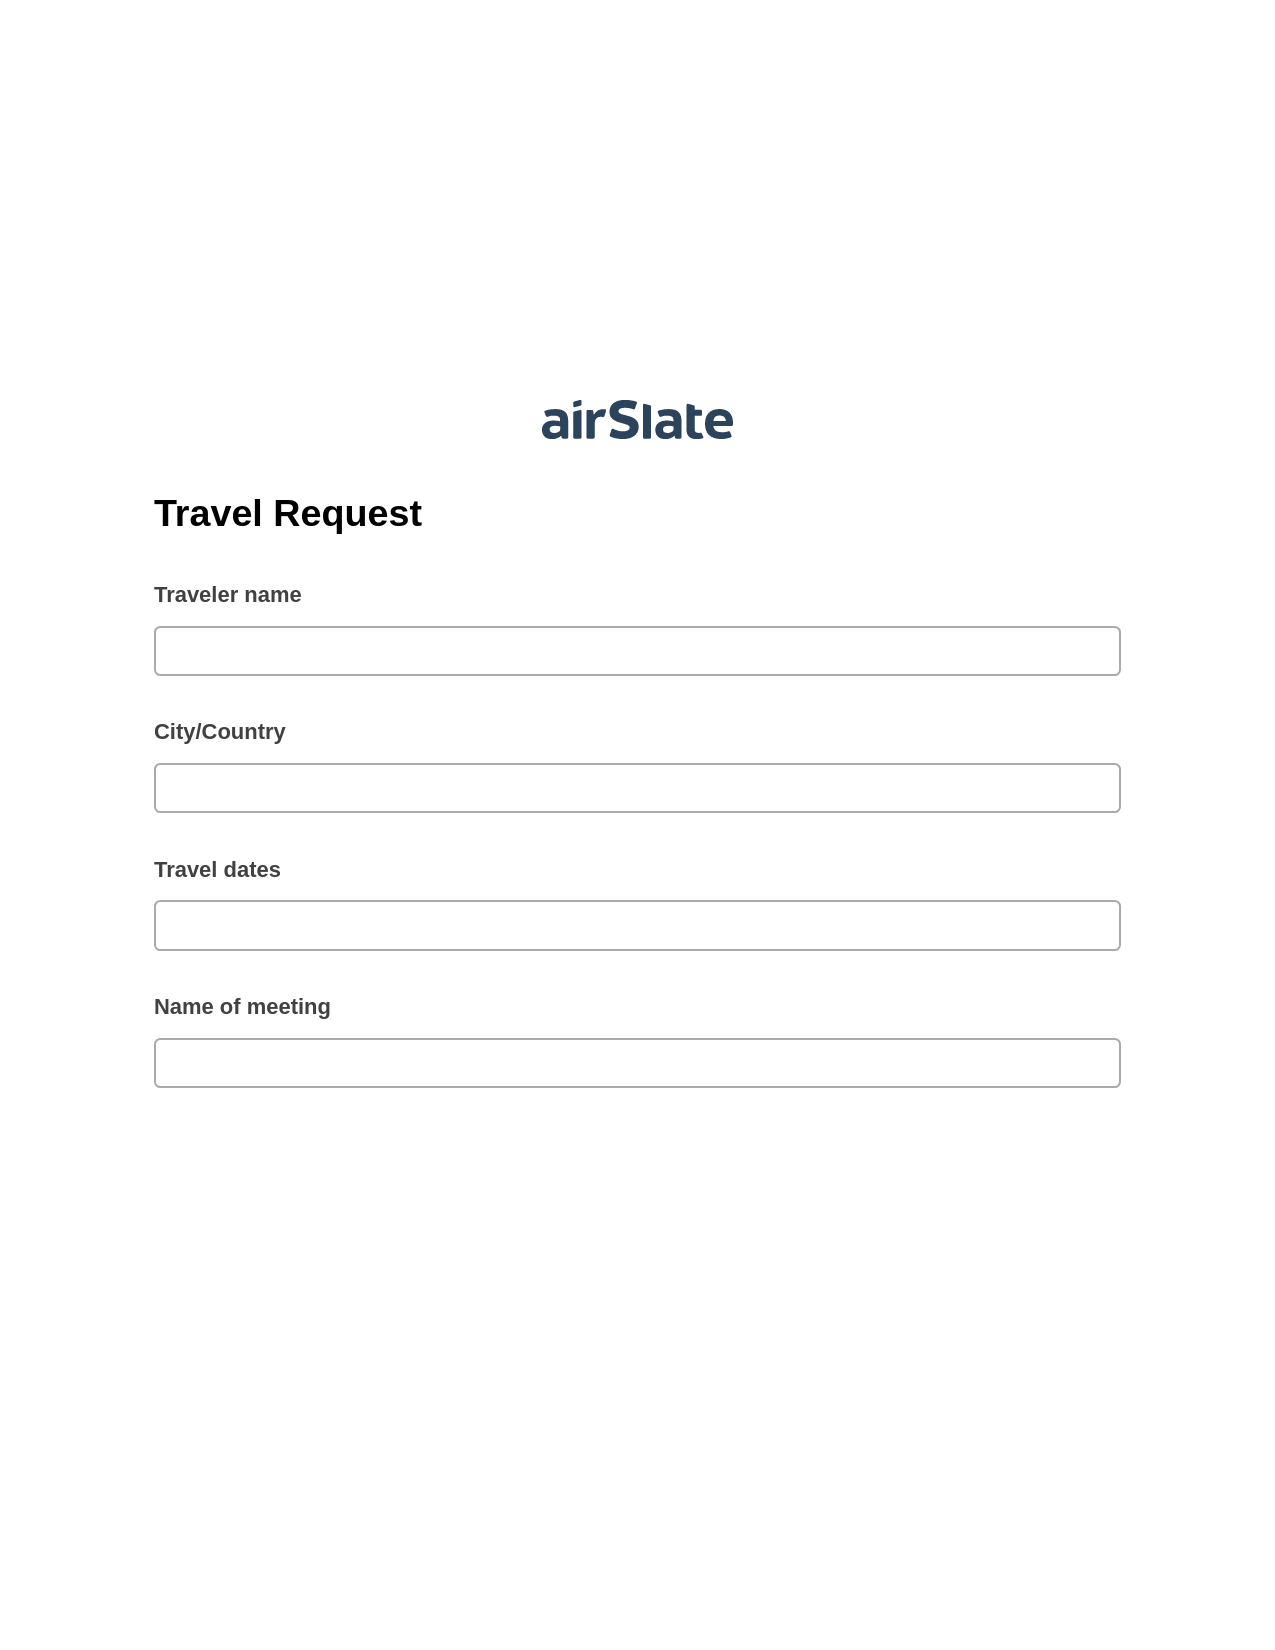 Travel Request Pre-fill Slate from MS Dynamics 365 Records Bot, Create NetSuite Records Bot, Export to Excel 365 Bot